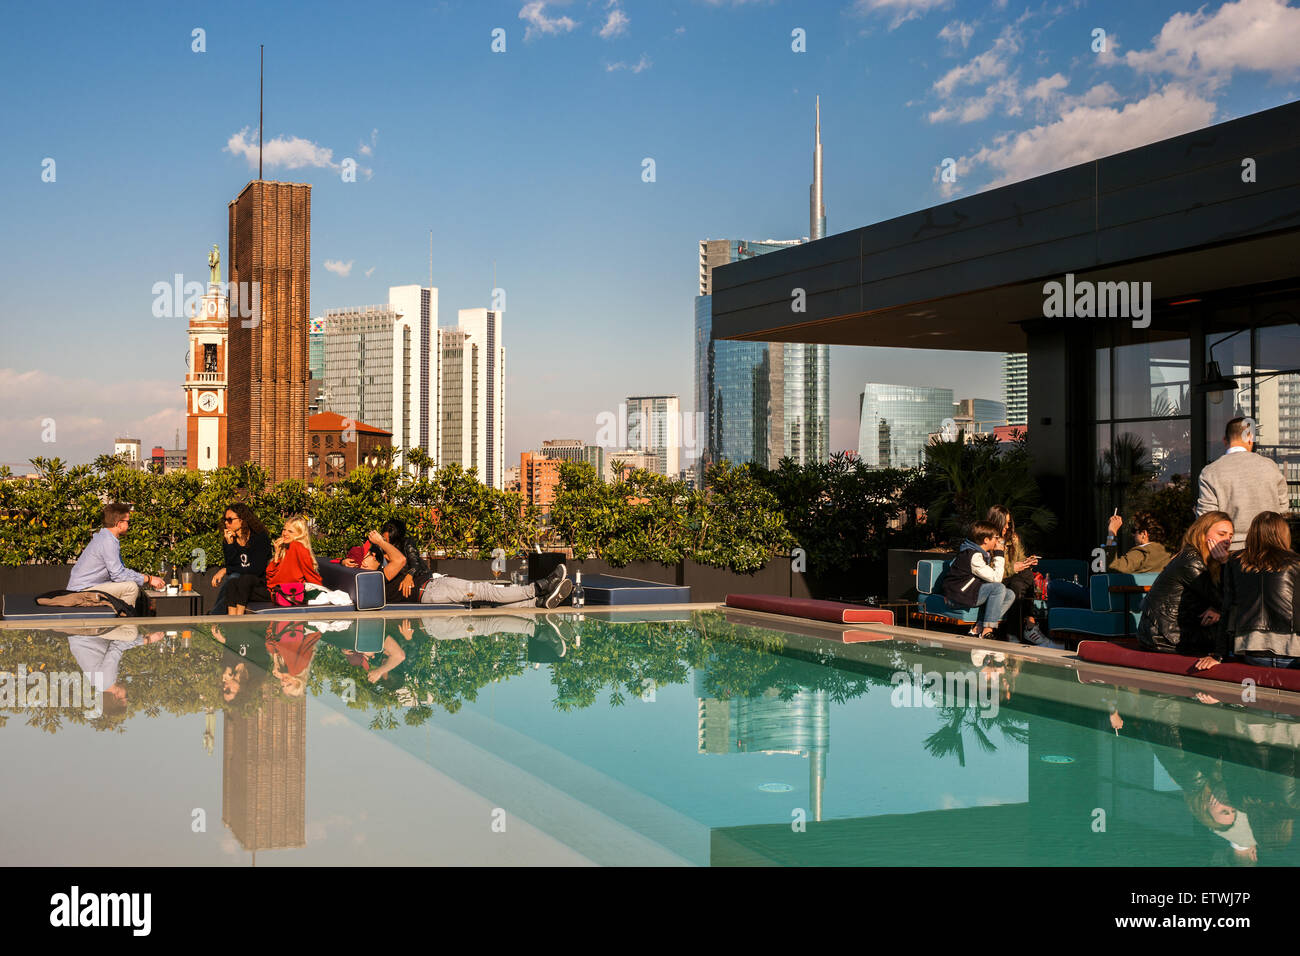 Ceresio 7 , milan High Resolution Stock Photography and Images - Alamy